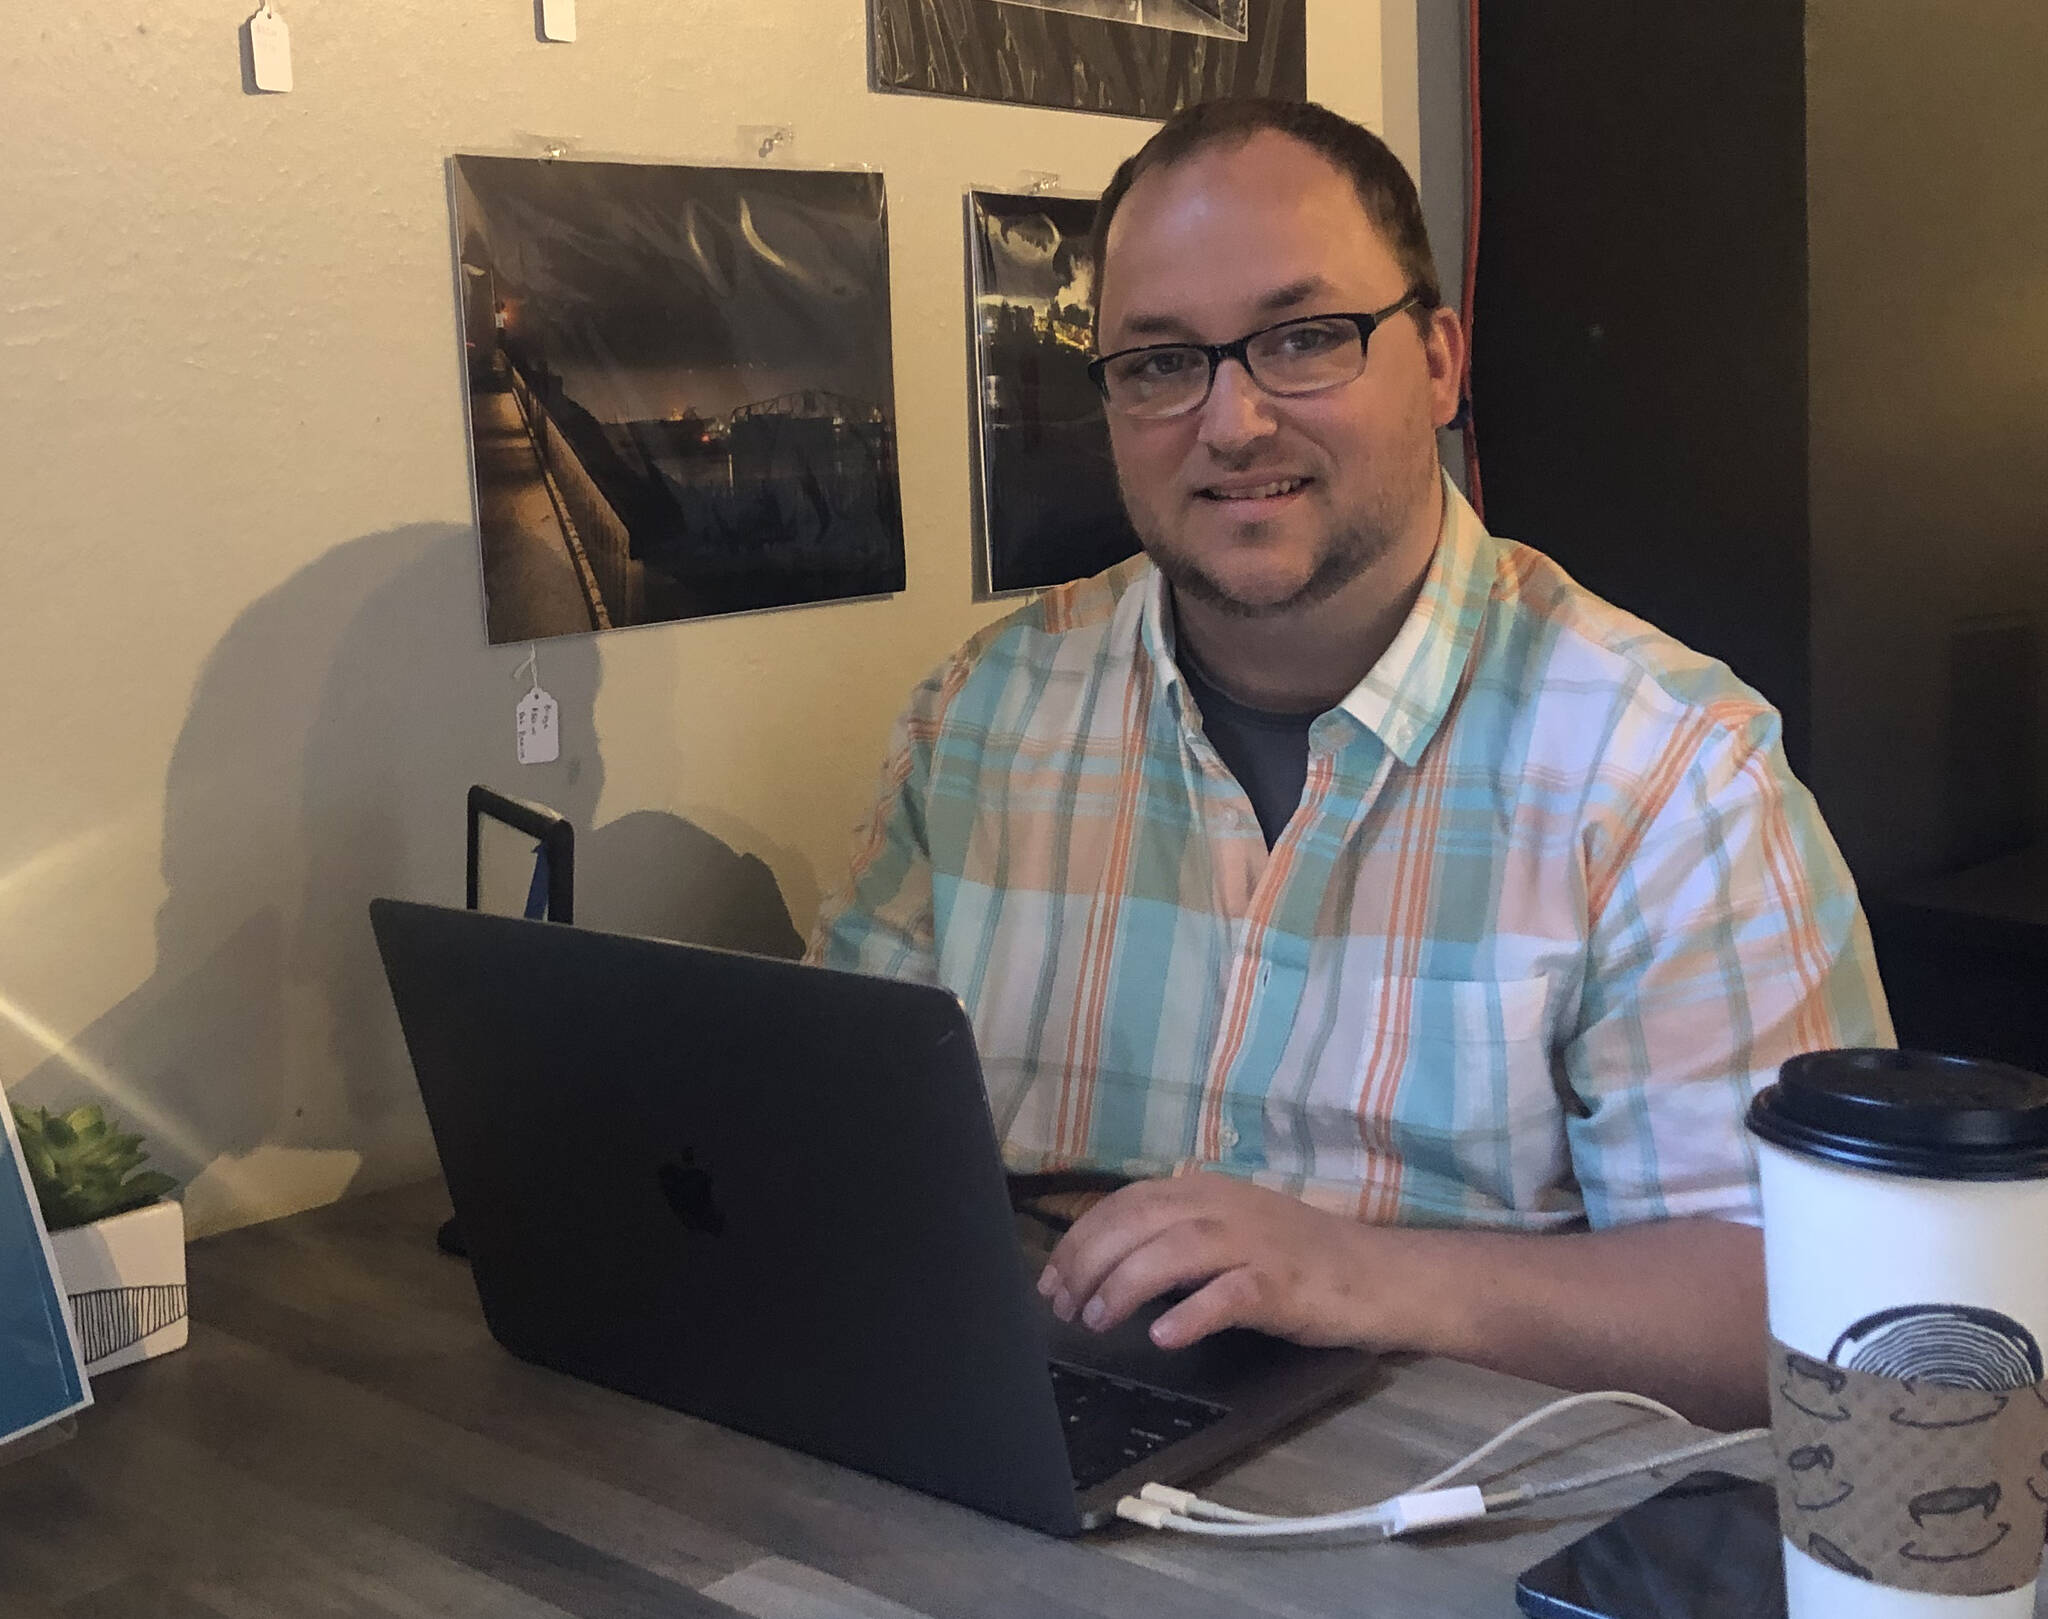 Michael Wagar / The Daily world
The Daily World reporter Matthew N. Wells is at one of his favorite places to write, Tinderbox Coffee Roasters in Aberdeen.